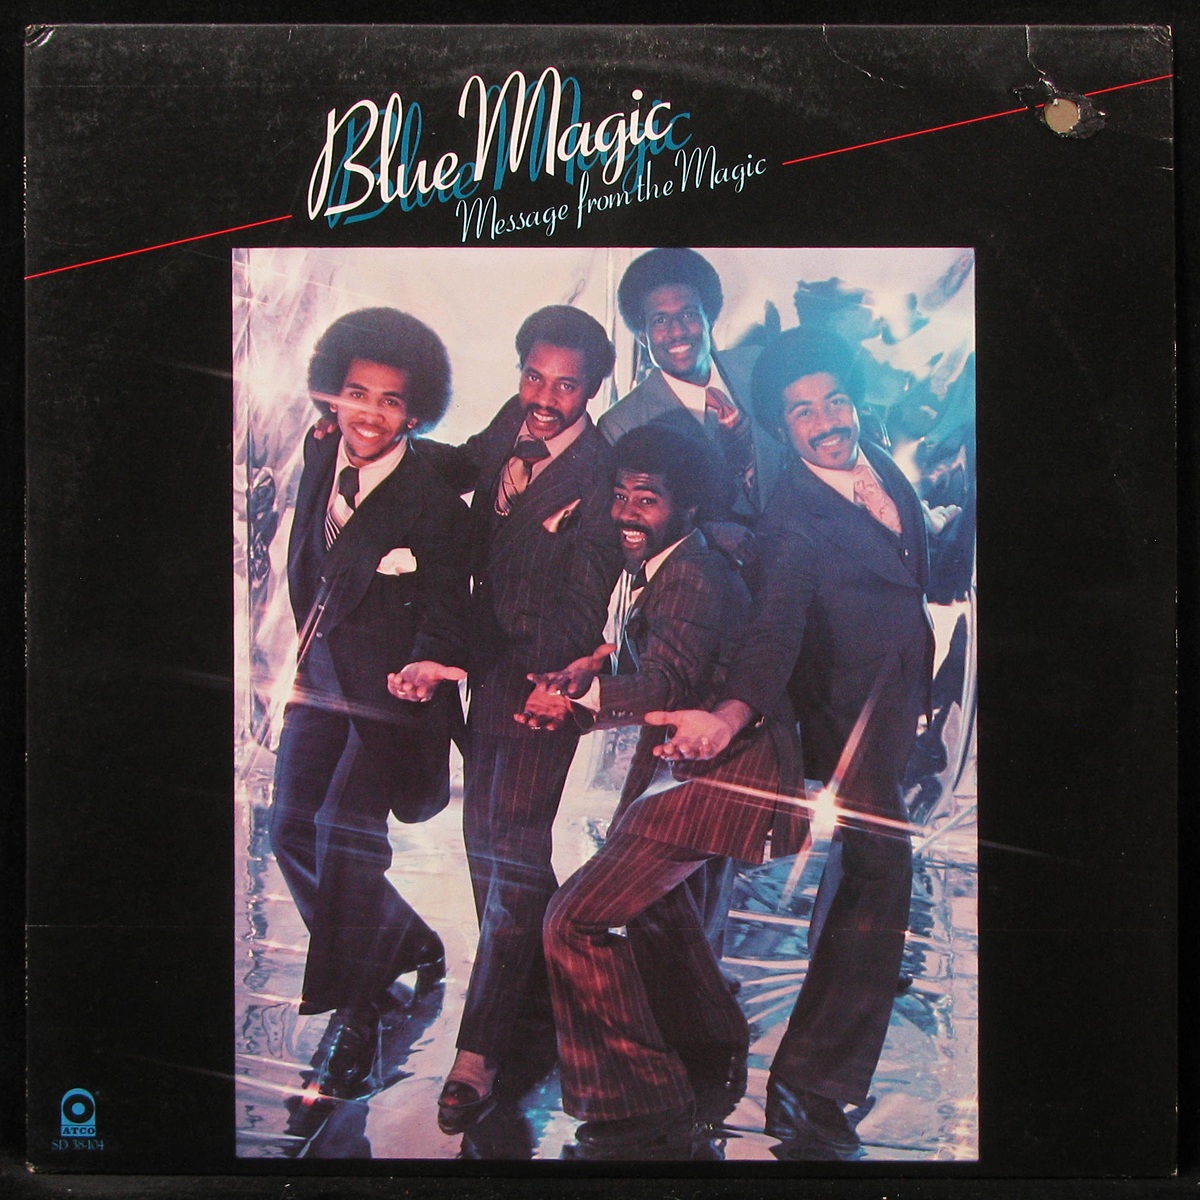 LP Blue Magic — Message From The Magic фото